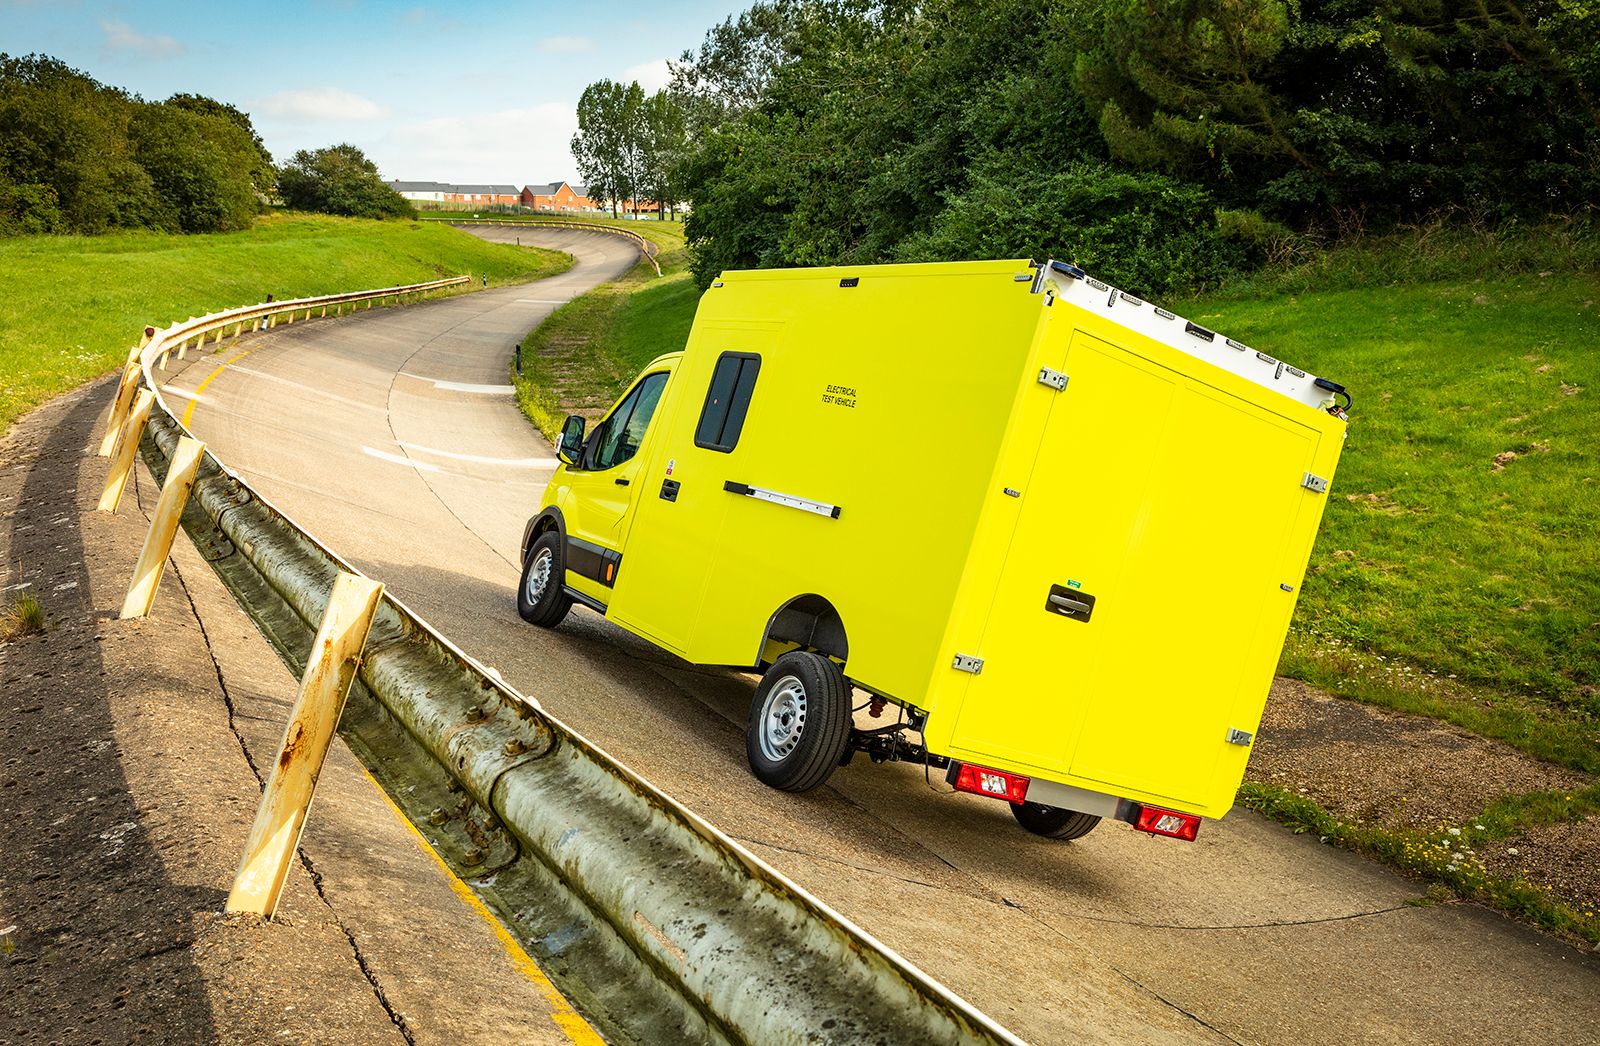 Venari Group and Ford launch new game-changing lightweight ambulance